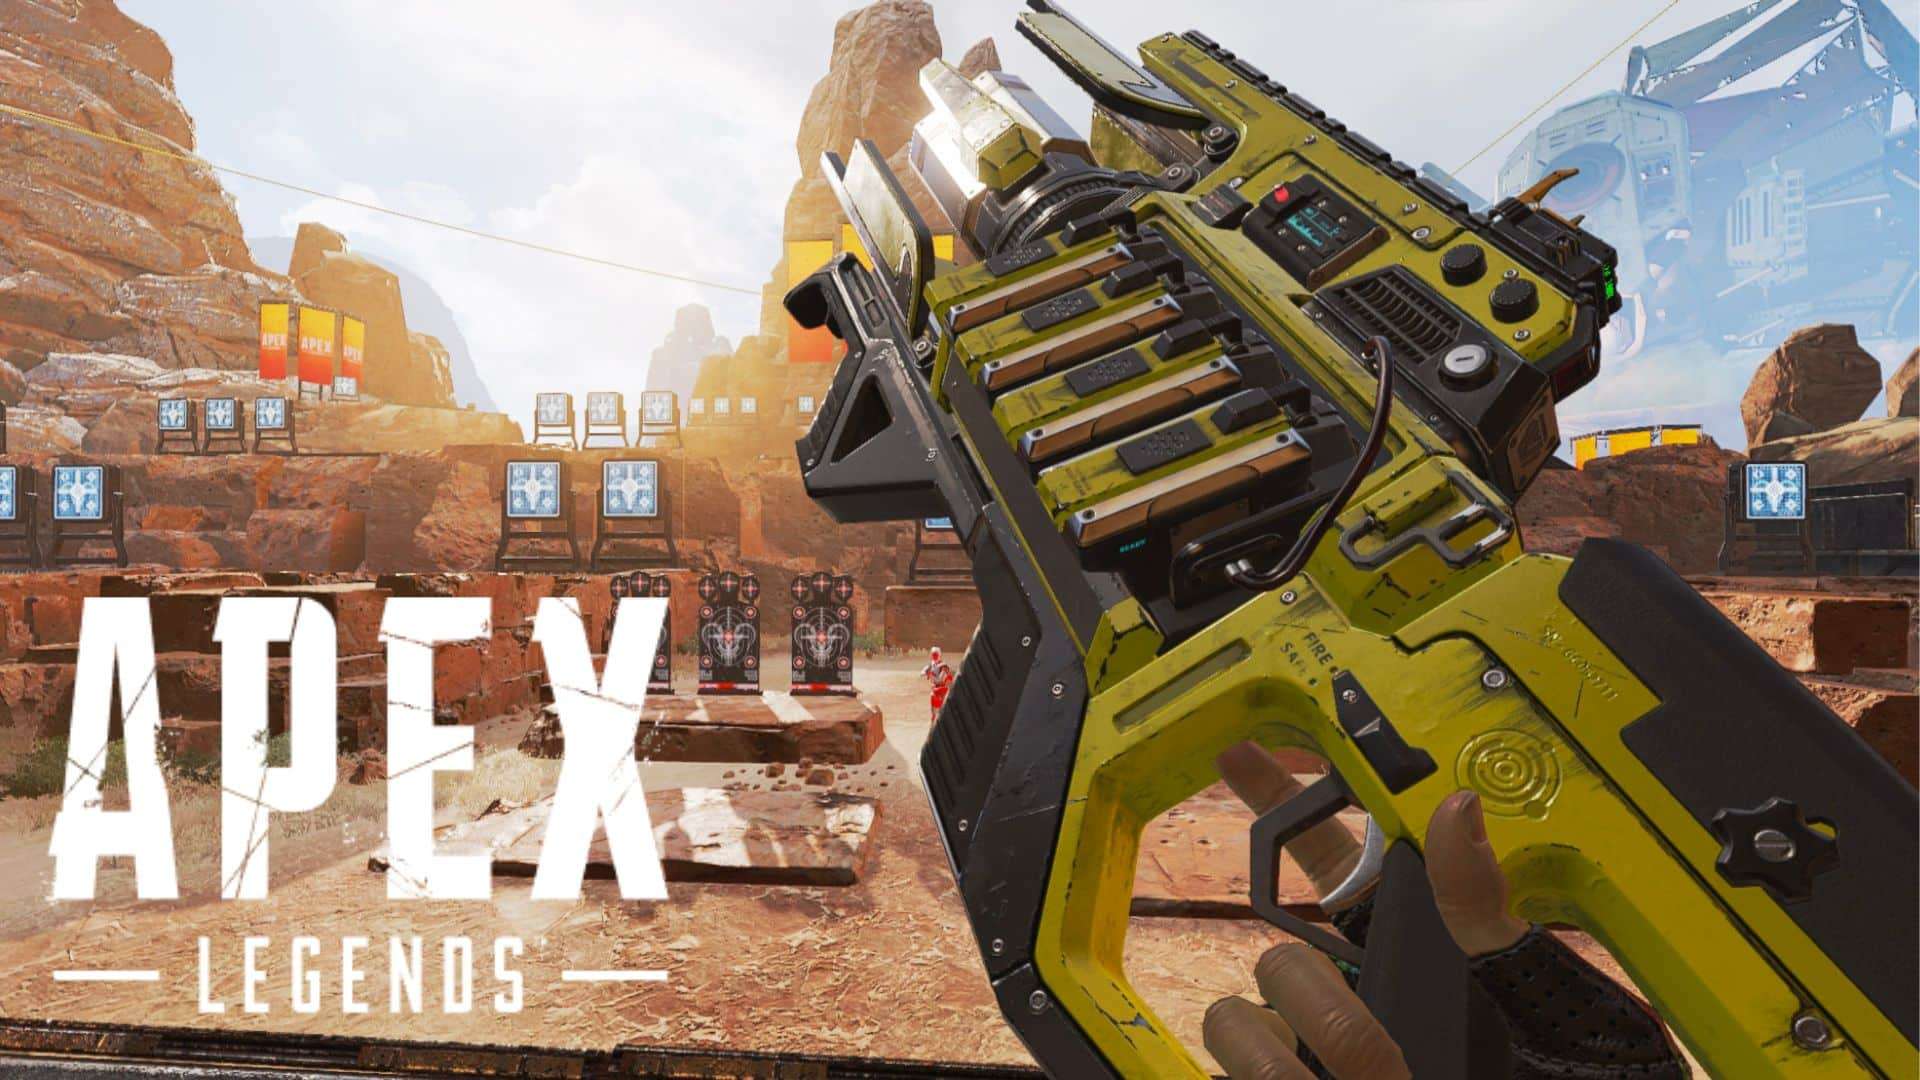 Charge Rifle being held in Apex Legends Firing Range